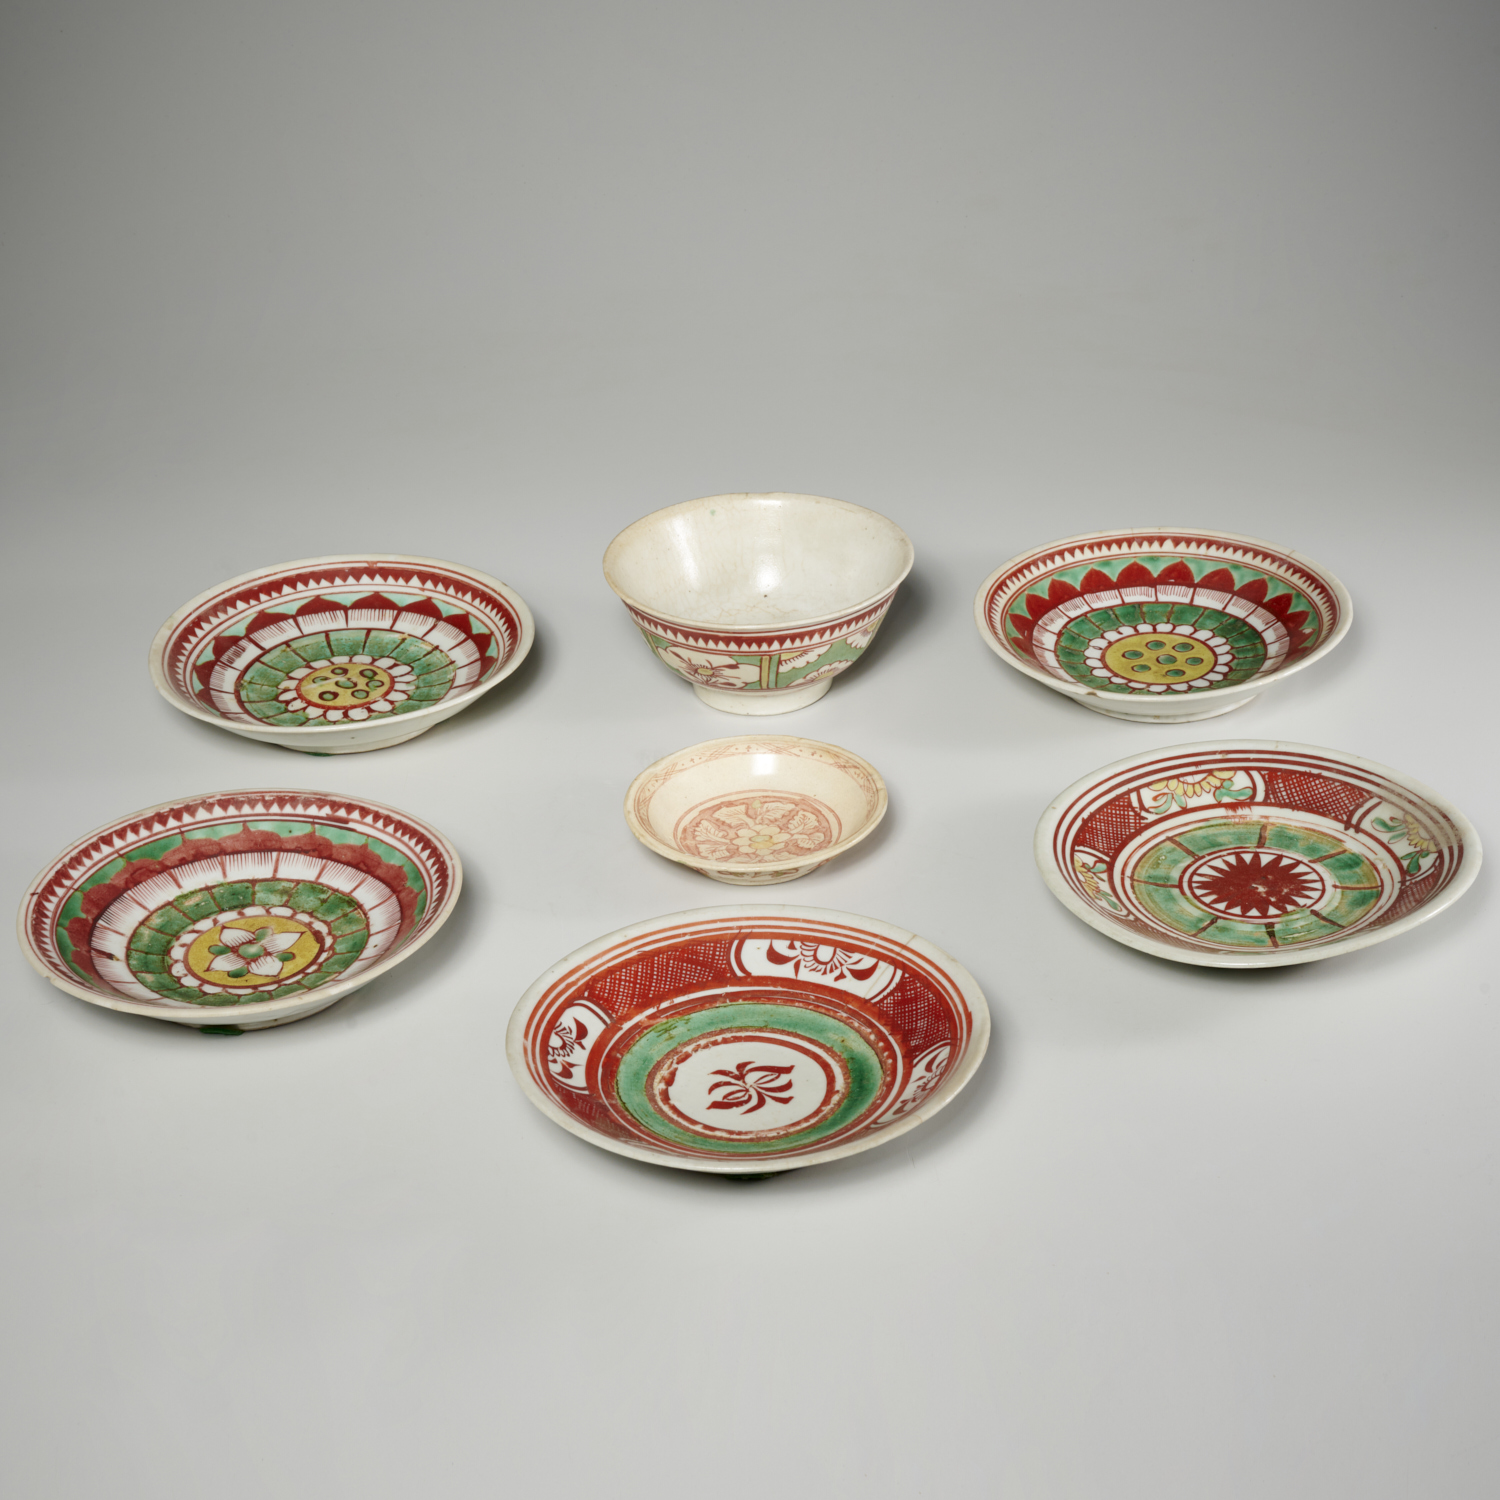 GROUP 7 SWATOW POLYCHROME DECORATED 3611fc